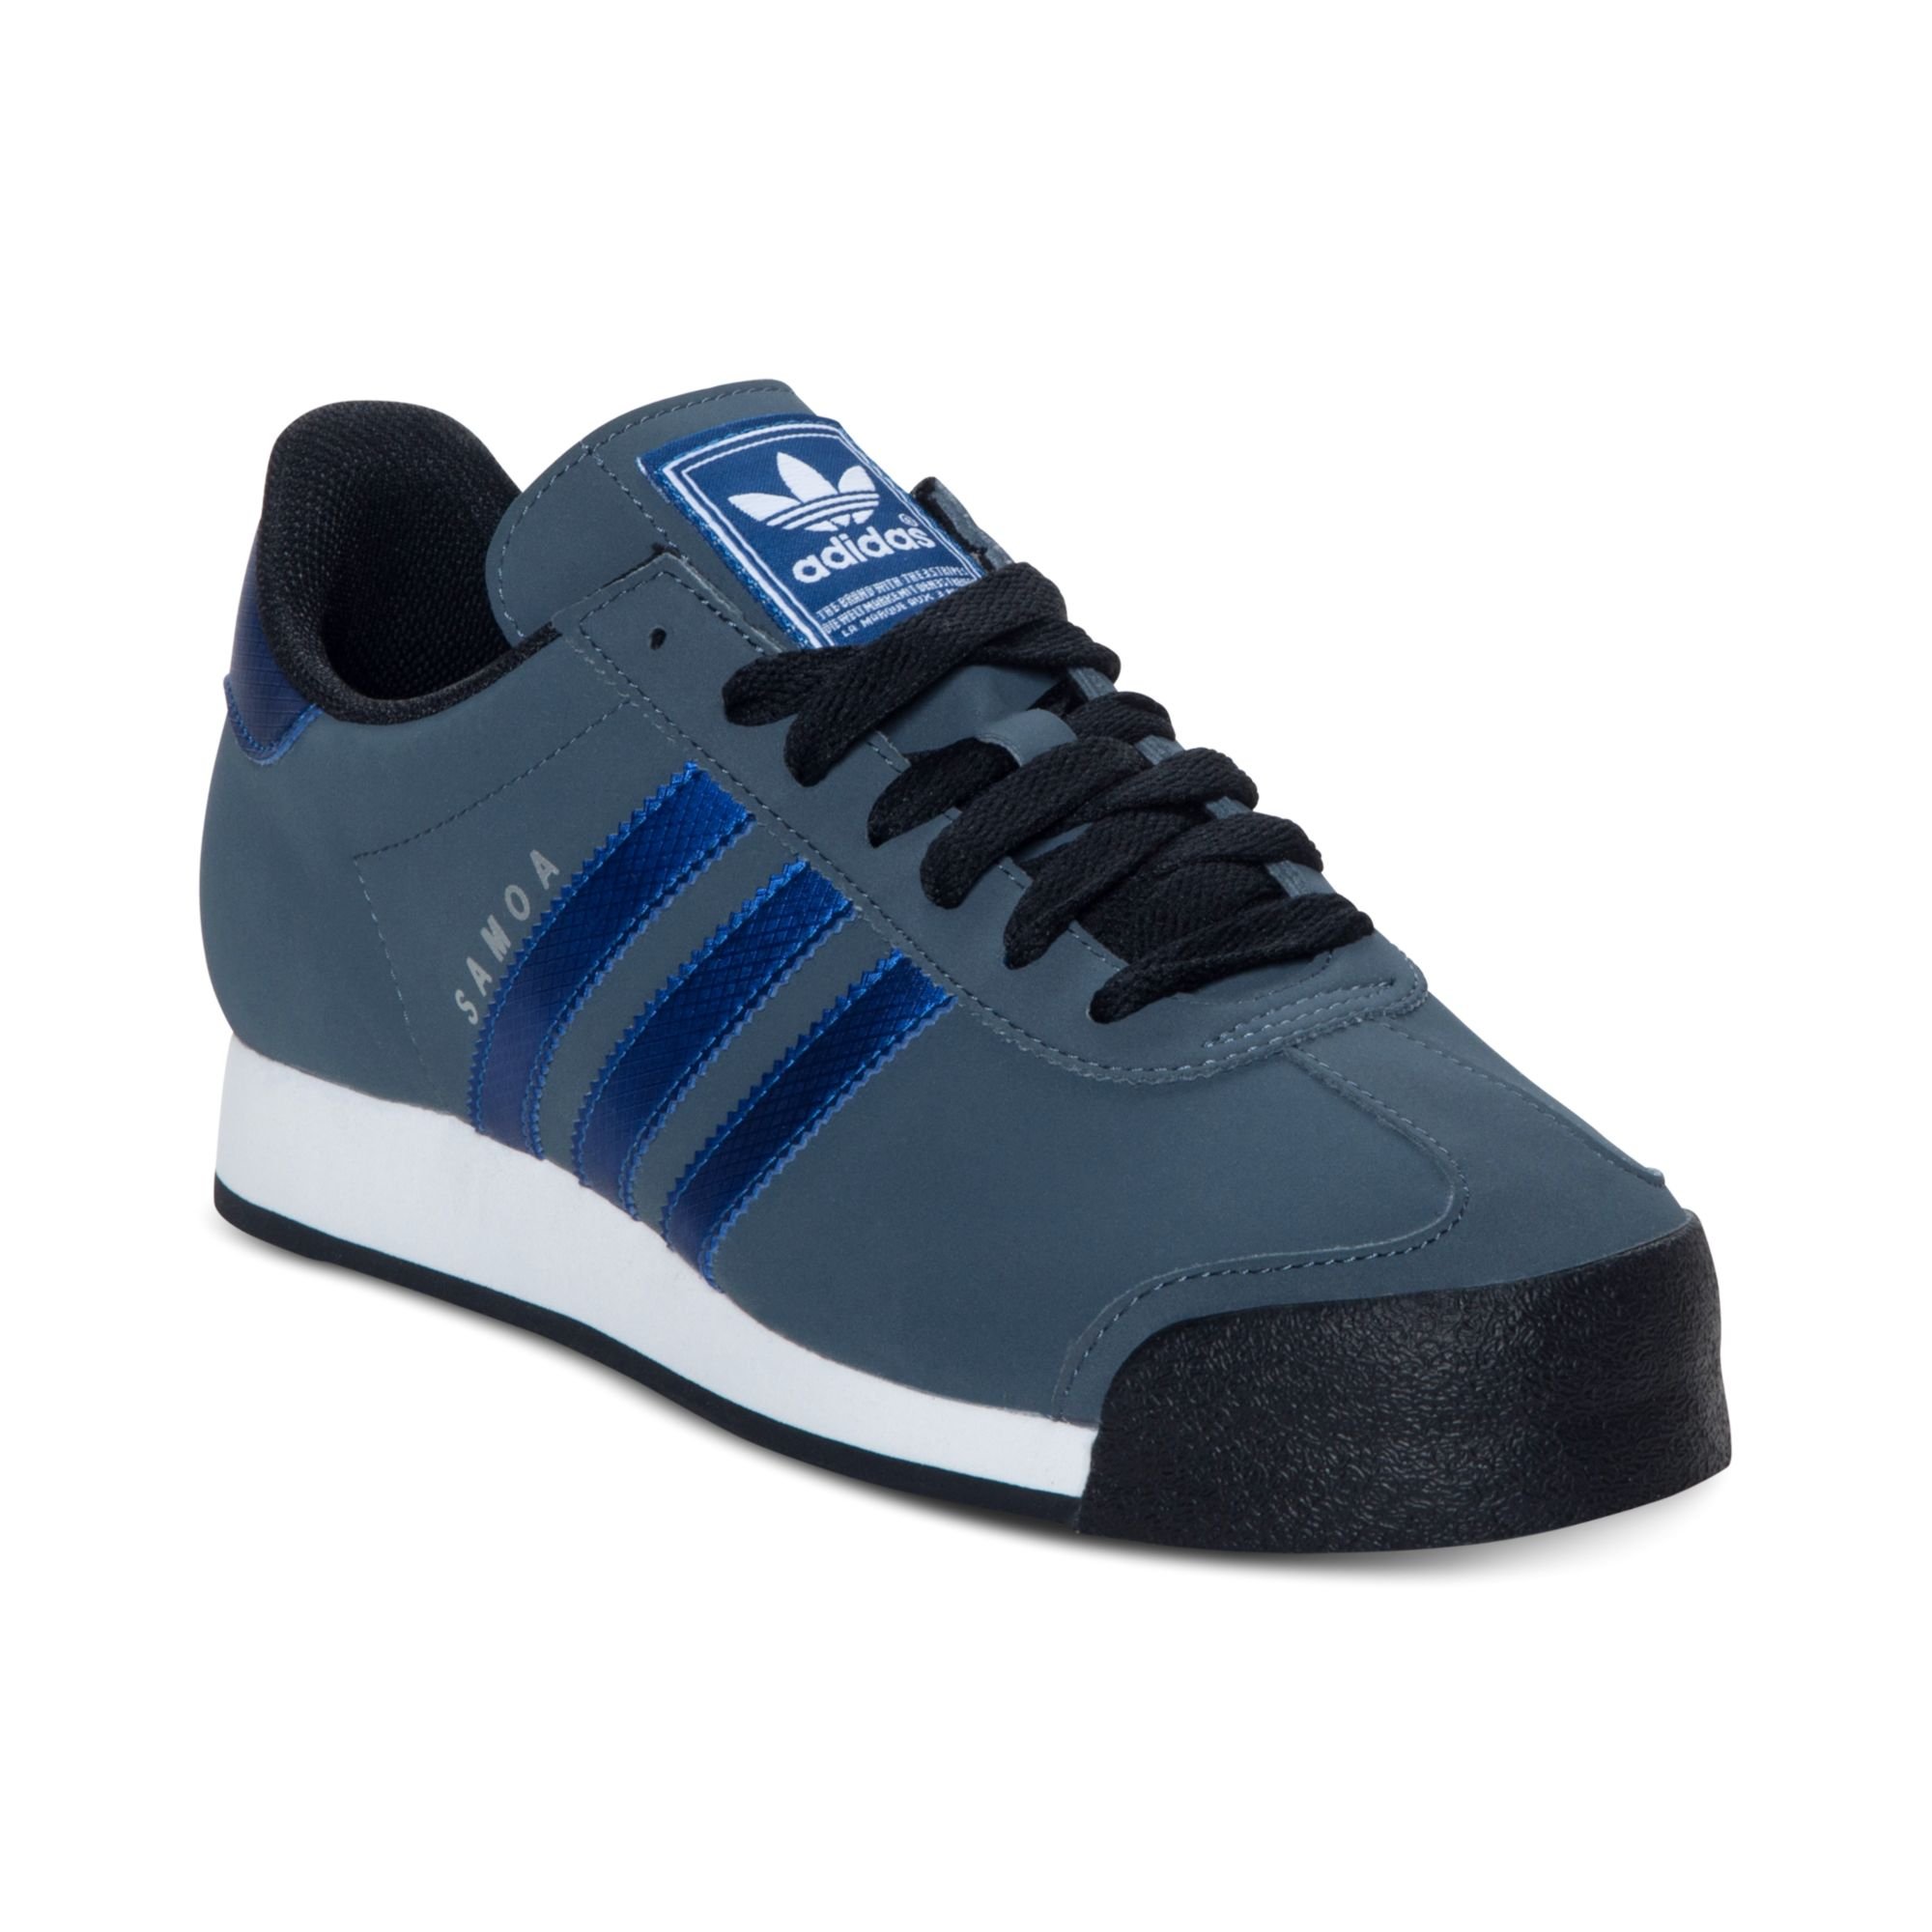 Lyst - Adidas Samoa Sneakers in Blue for Men